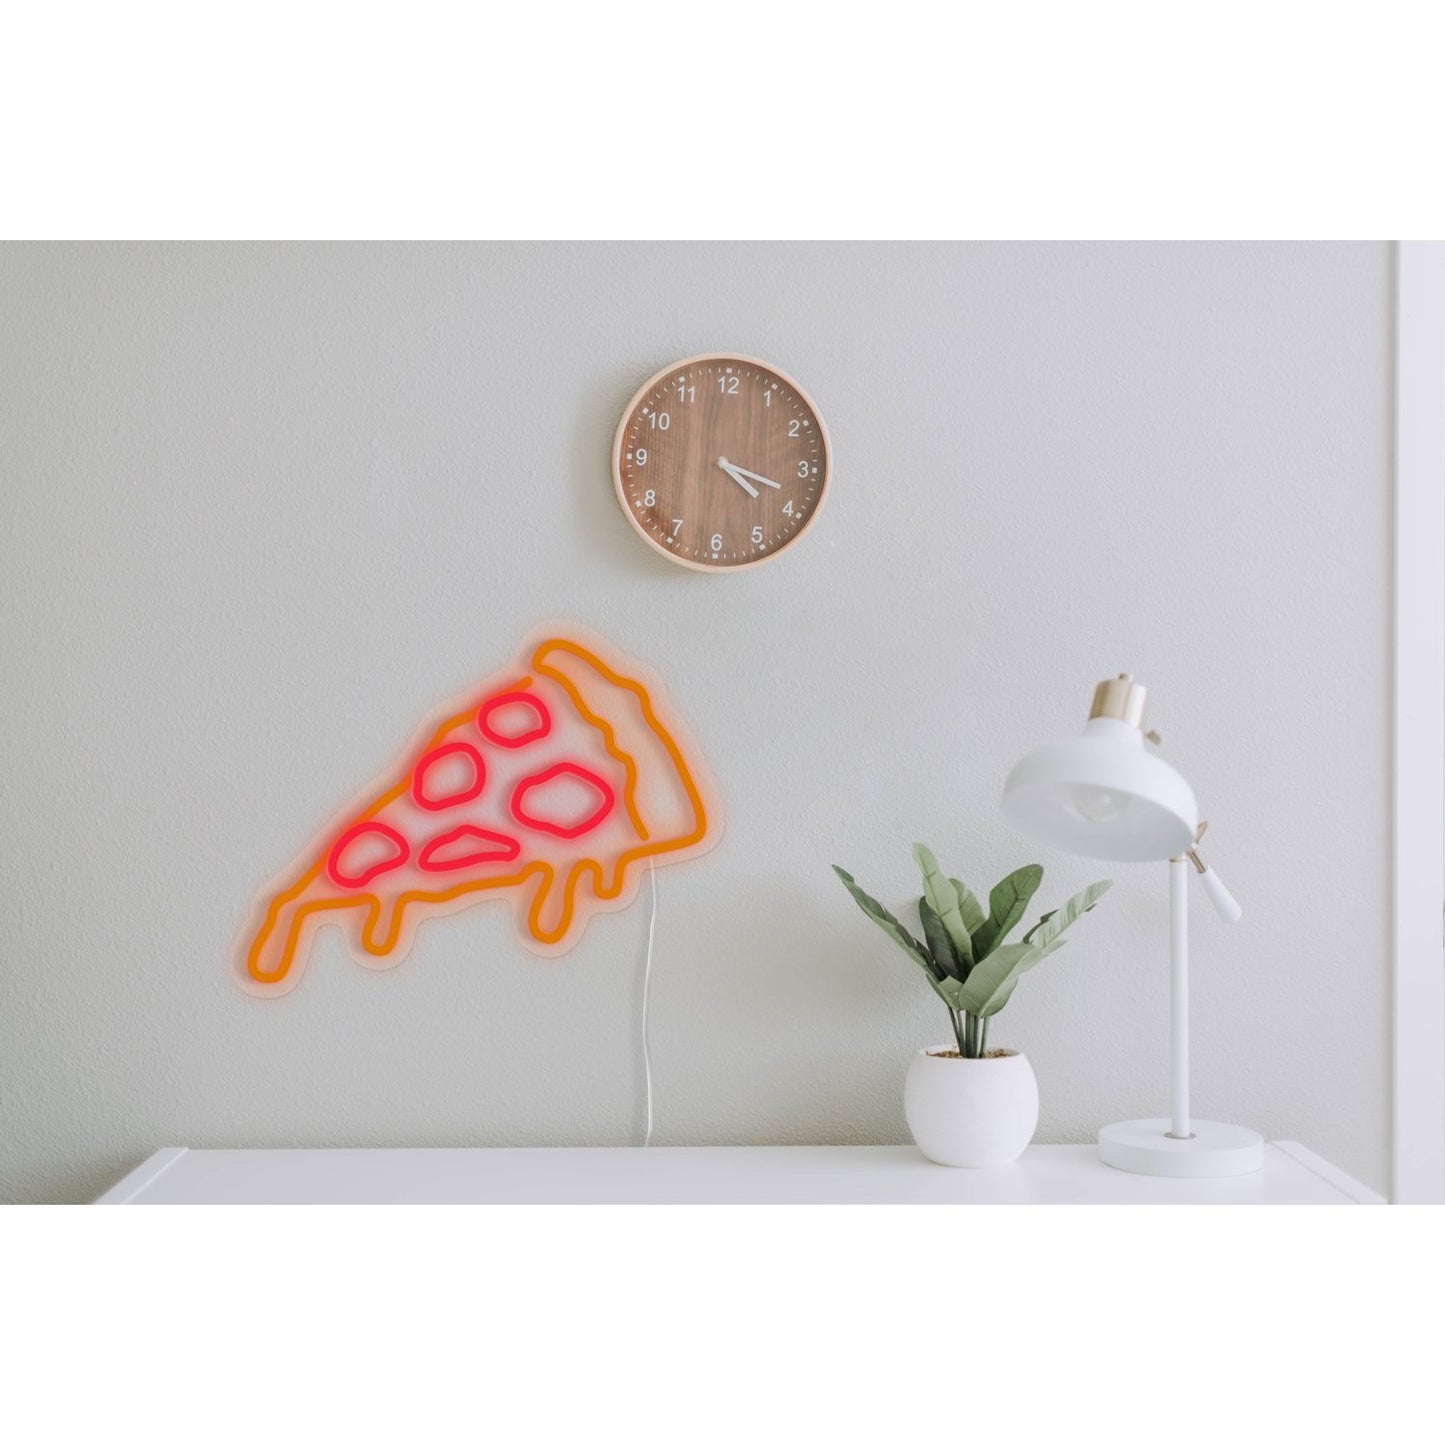 NEON LED SIGN - SMALL PIZZA